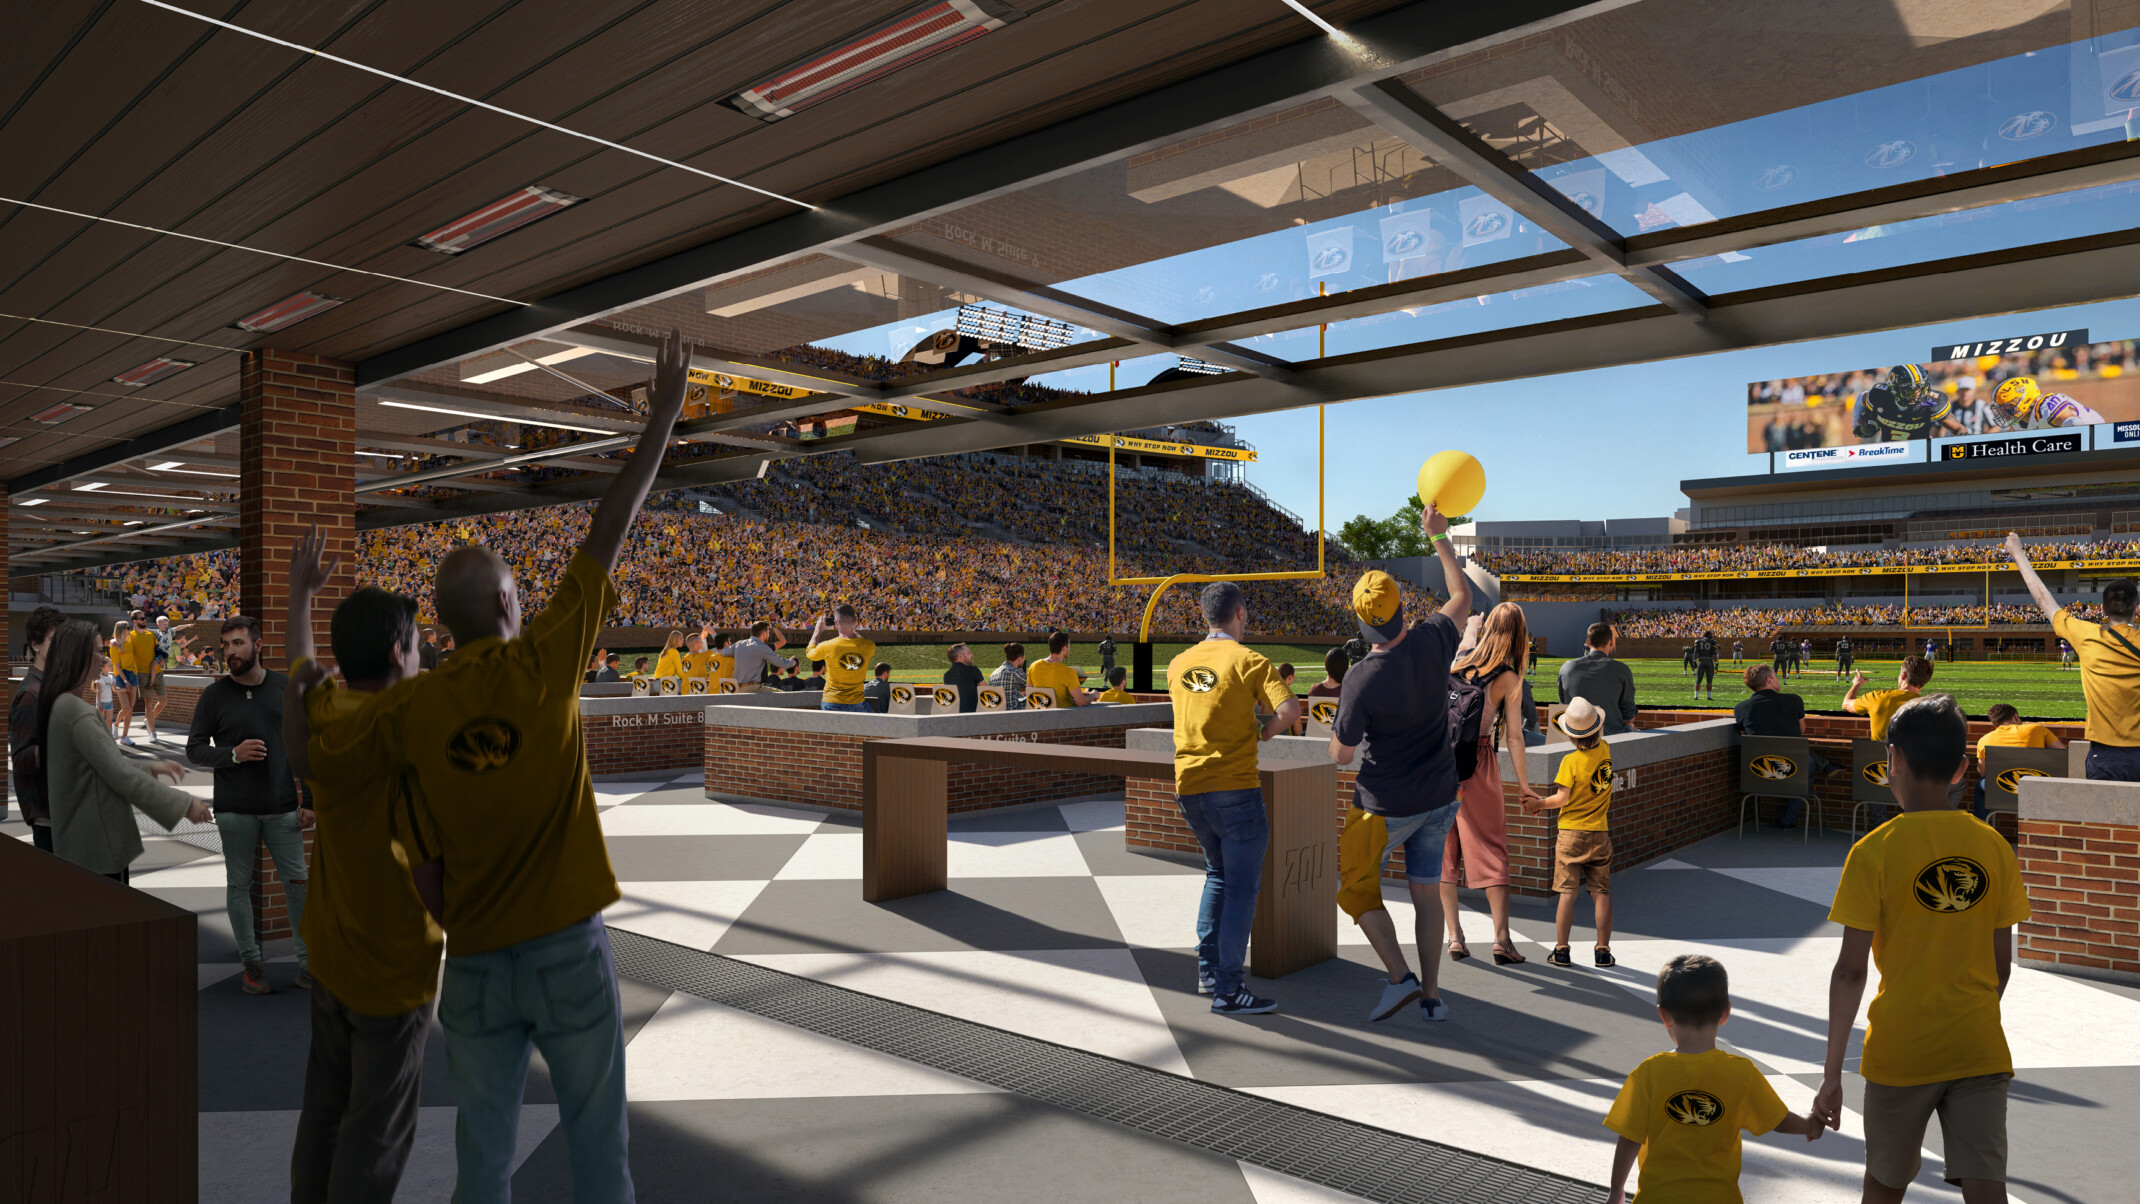 Seating and community space behind goal post of renovated football stadium fans engage with game